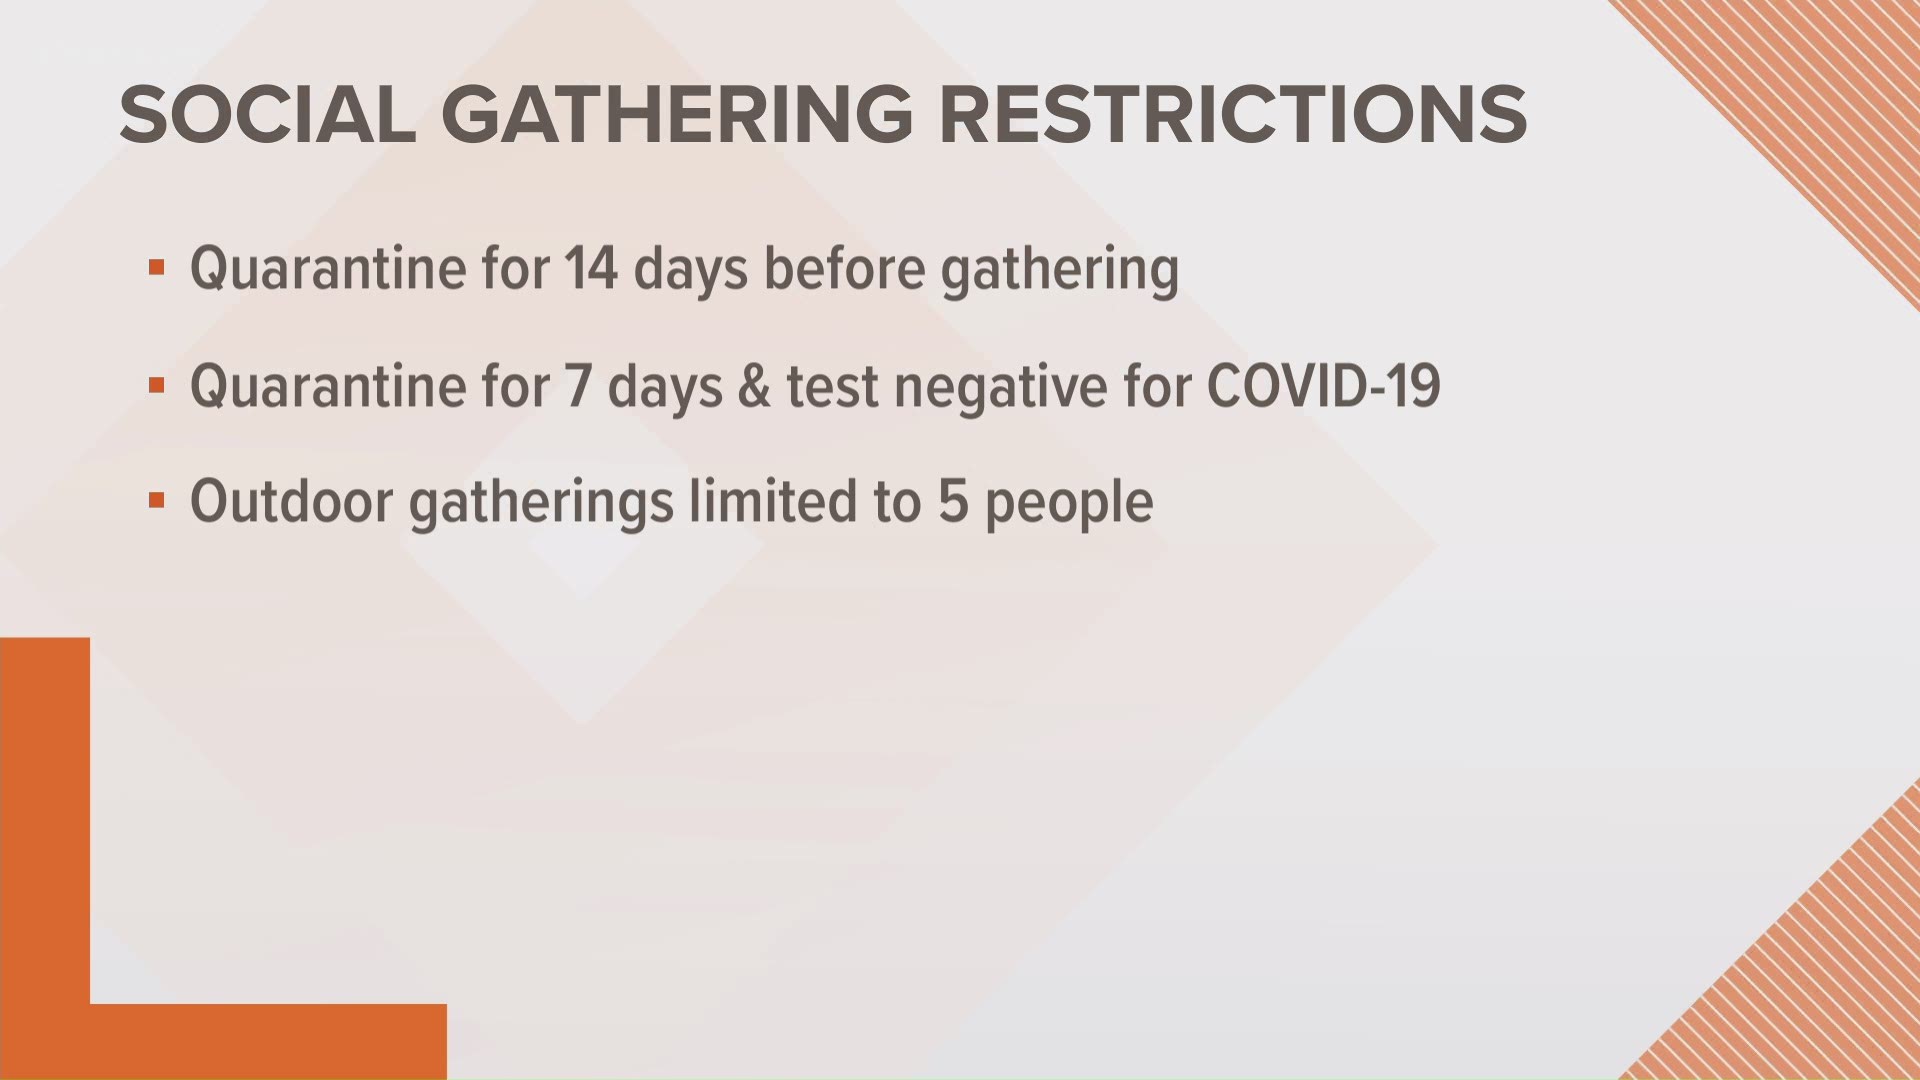 With Thanksgiving quickly approaching, what are the rules for social gatherings in the wake of the governor's new restrictions?